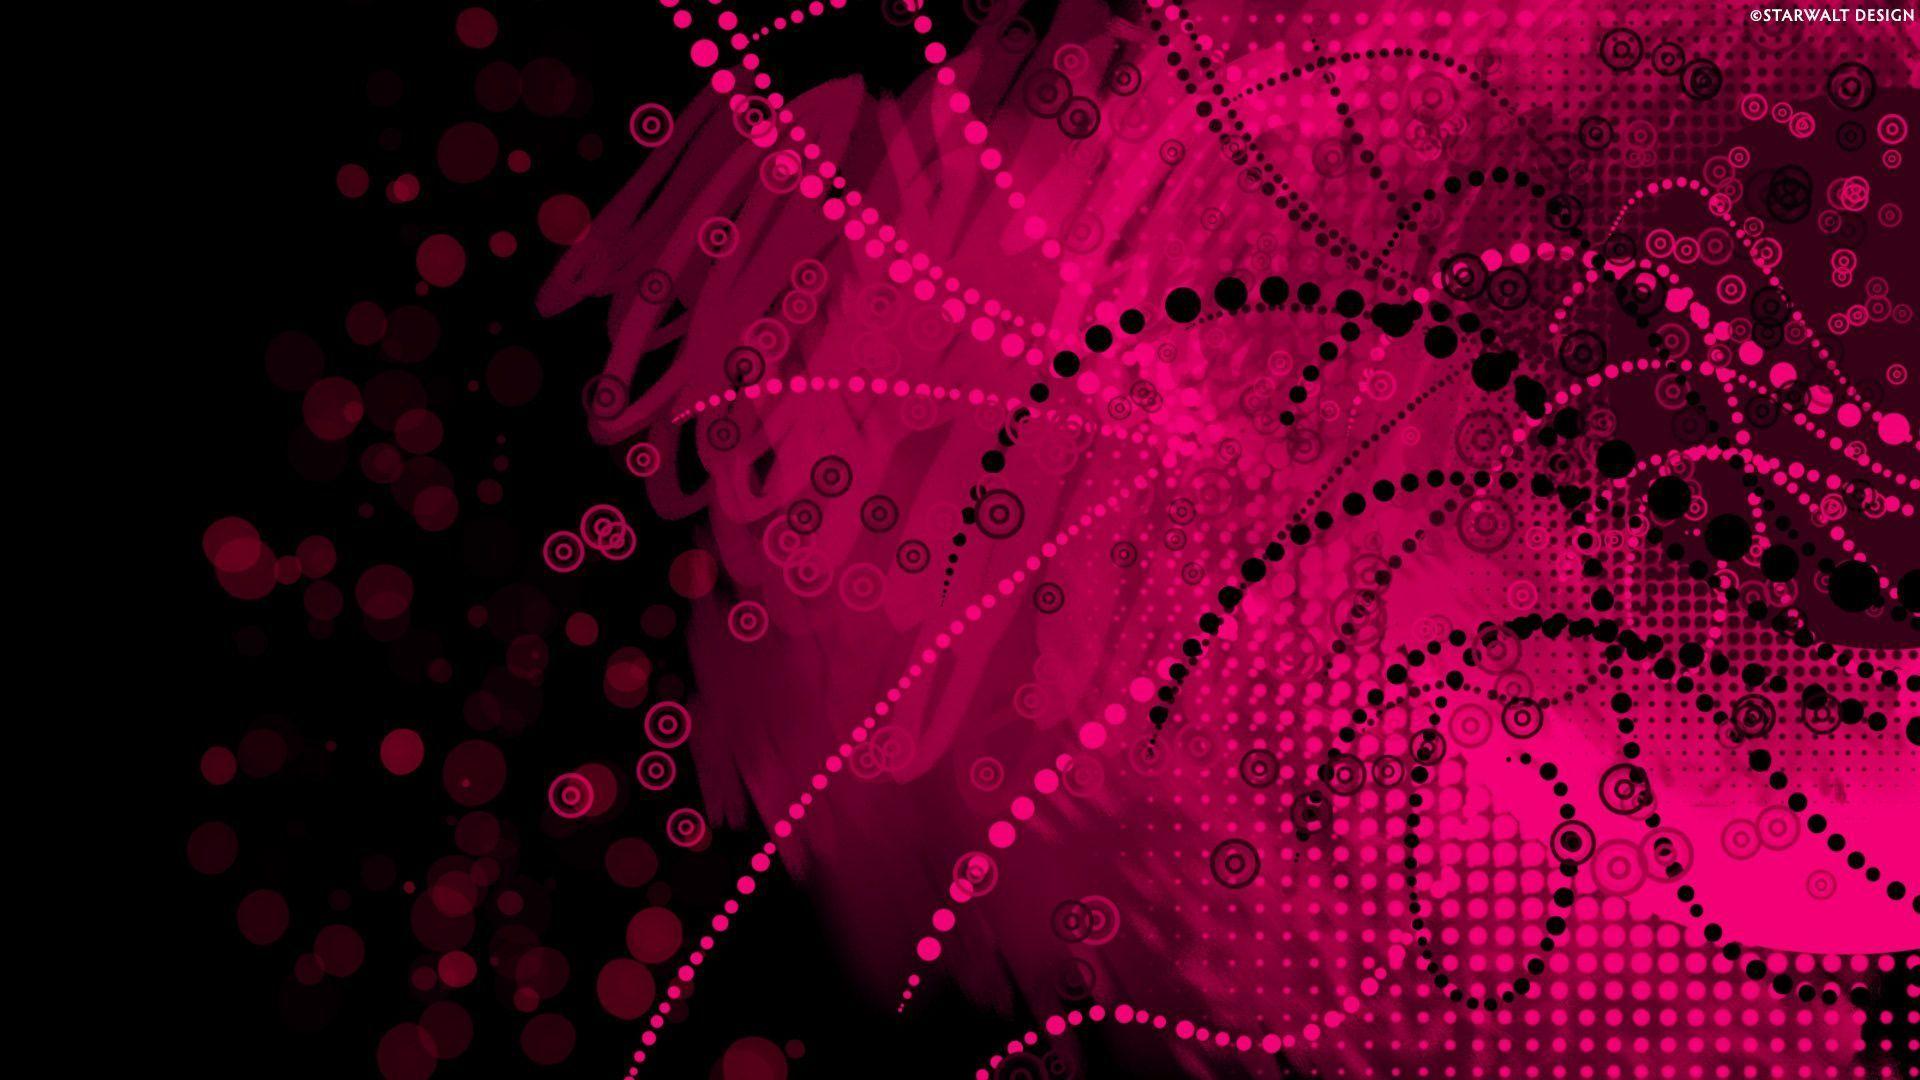 Pink And Black Background Wallpaper. HD Wallpaper